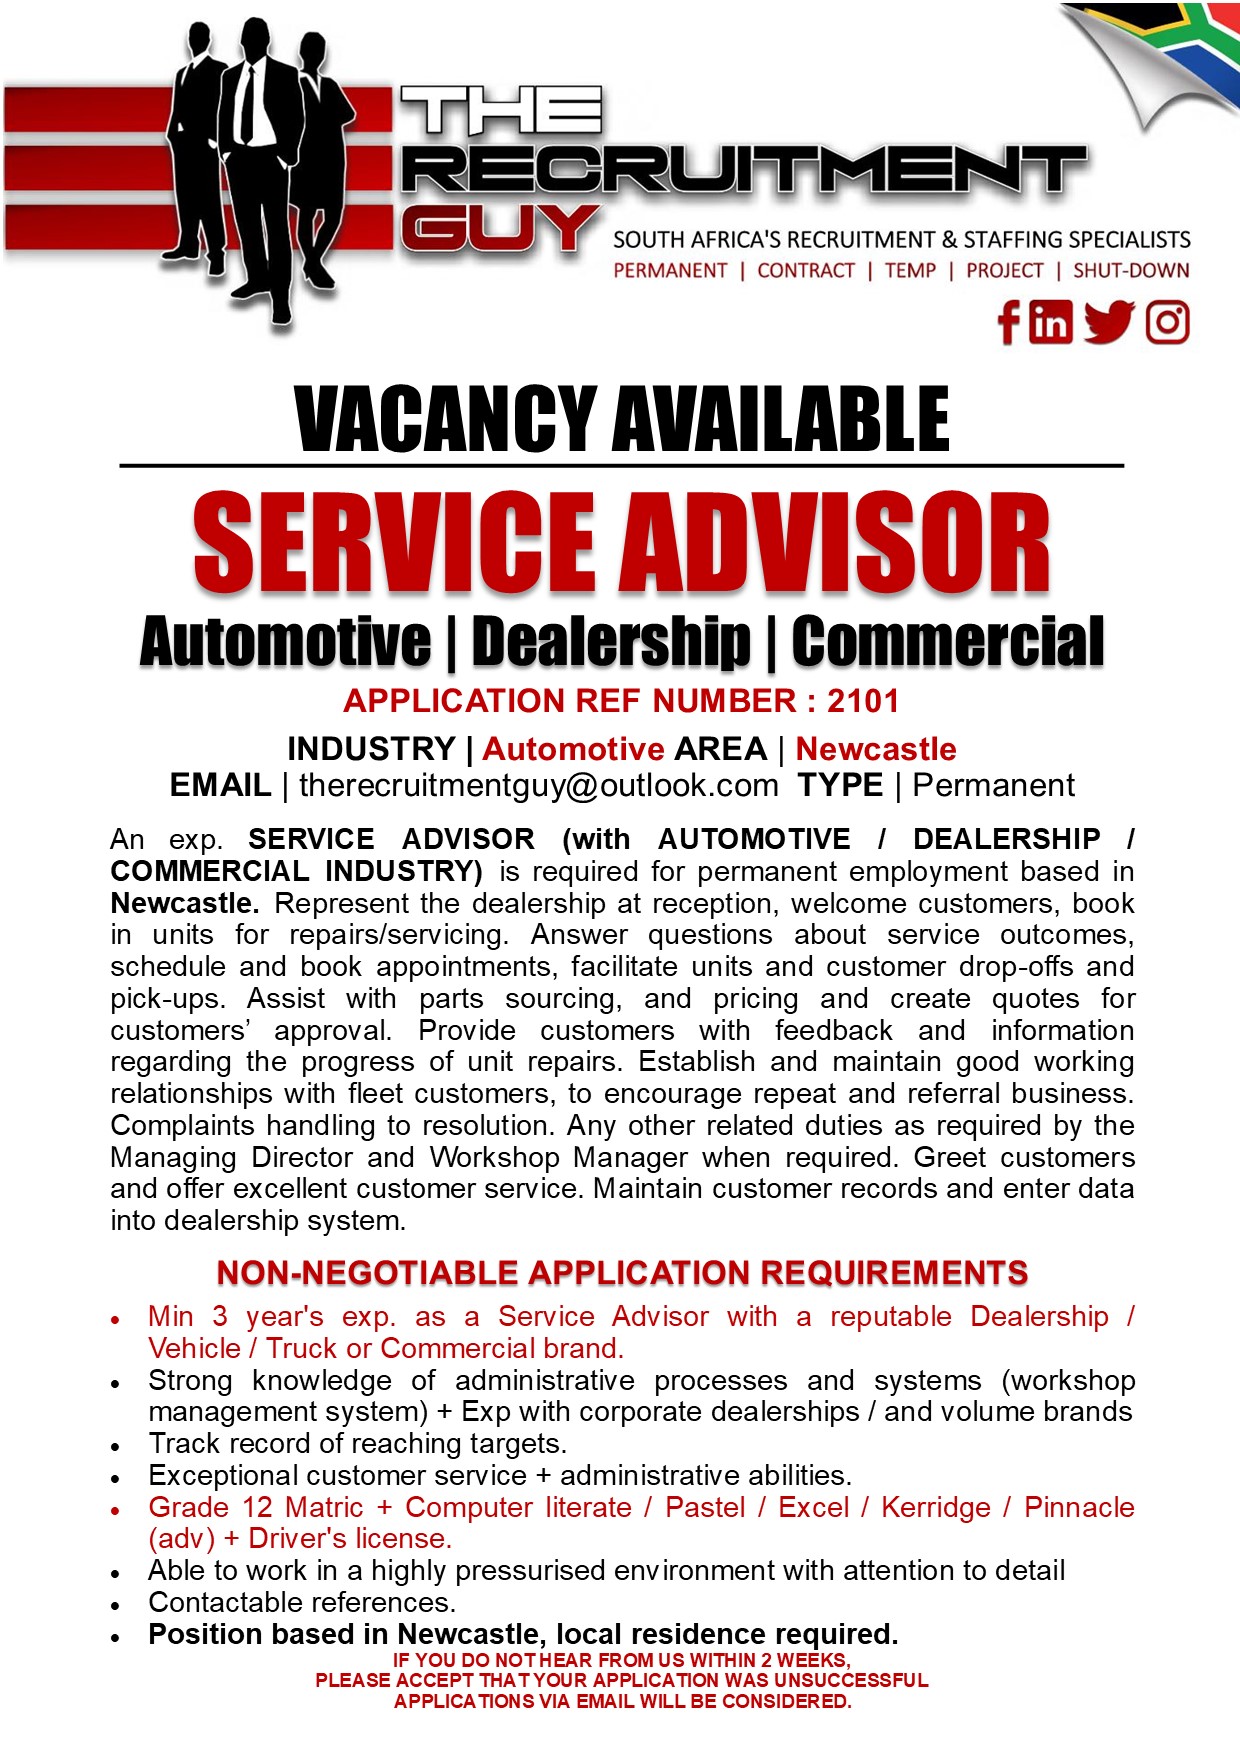 VACANCY AVAILABLE
SERVICE ADVISOR

APPLICATION REF NUMBER : 2101

INDUSTRY | Automotive AREA | Newcastle
EMAIL | therecruitmentguy@outlook.com TYPE | Permanent

An exp. SERVICE ADVISOR (with AUTOMOTIVE / DEALERSHIP /
COMMERCIAL INDUSTRY) is required for permanent employment based in
Newcastle. Represent the dealership at reception, welcome customers, book
in units for repairs/servicing. Answer questions about service outcomes,
schedule and book appointments, facilitate units and customer drop-offs and
pick-ups. Assist with parts sourcing, and pricing and create quotes for
customers’ approval. Provide customers with feedback and information
regarding the progress of unit repairs. Establish and maintain good working
relationships with fleet customers, to encourage repeat and referral business
Complaints handling to resolution. Any other related duties as required by the
Managing Director and Workshop Manager when required. Greet customers
and offer excellent customer service. Maintain customer records and enter data
into dealership system

NON-NEGOTIABLE APPLICATION REQUIREMENTS

« Min 3 year's exp. as a Service Advisor with a reputable Dealership /
Vehicle / Truck or Commercial brand

« Strong knowledge of administrative processes and systems (workshop
management system) + Exp with corporate dealerships / and volume brands

« Track record of reaching targets

« Exceptional customer service + administrative abilities

+ Grade 12 Matric + Computer literate / Pastel / Excel / Kerridge / Pinnacle
(adv) + Driver's license

« Able to work in a highly pressurised environment with attention to detail

« Contactable references

« Position based in Newcastle, local residence required.
IF YOU DO NOTHEAR FROM US WITHIN 2 WEEKS,
PLEASE ACCEPT THAT YOUR APPLICATION WAS UNSUCCESSFUL
APPLICATIONS VIA EMAIL WILL BE CONSIDERED.

GUY SOUTH AFRICA'S RECRUITMENT & STAFFING SPECIALISTS

PERMANENT | CONTRACT | TEMP | PROJECT | SHUT-DOWN

{ink JG]